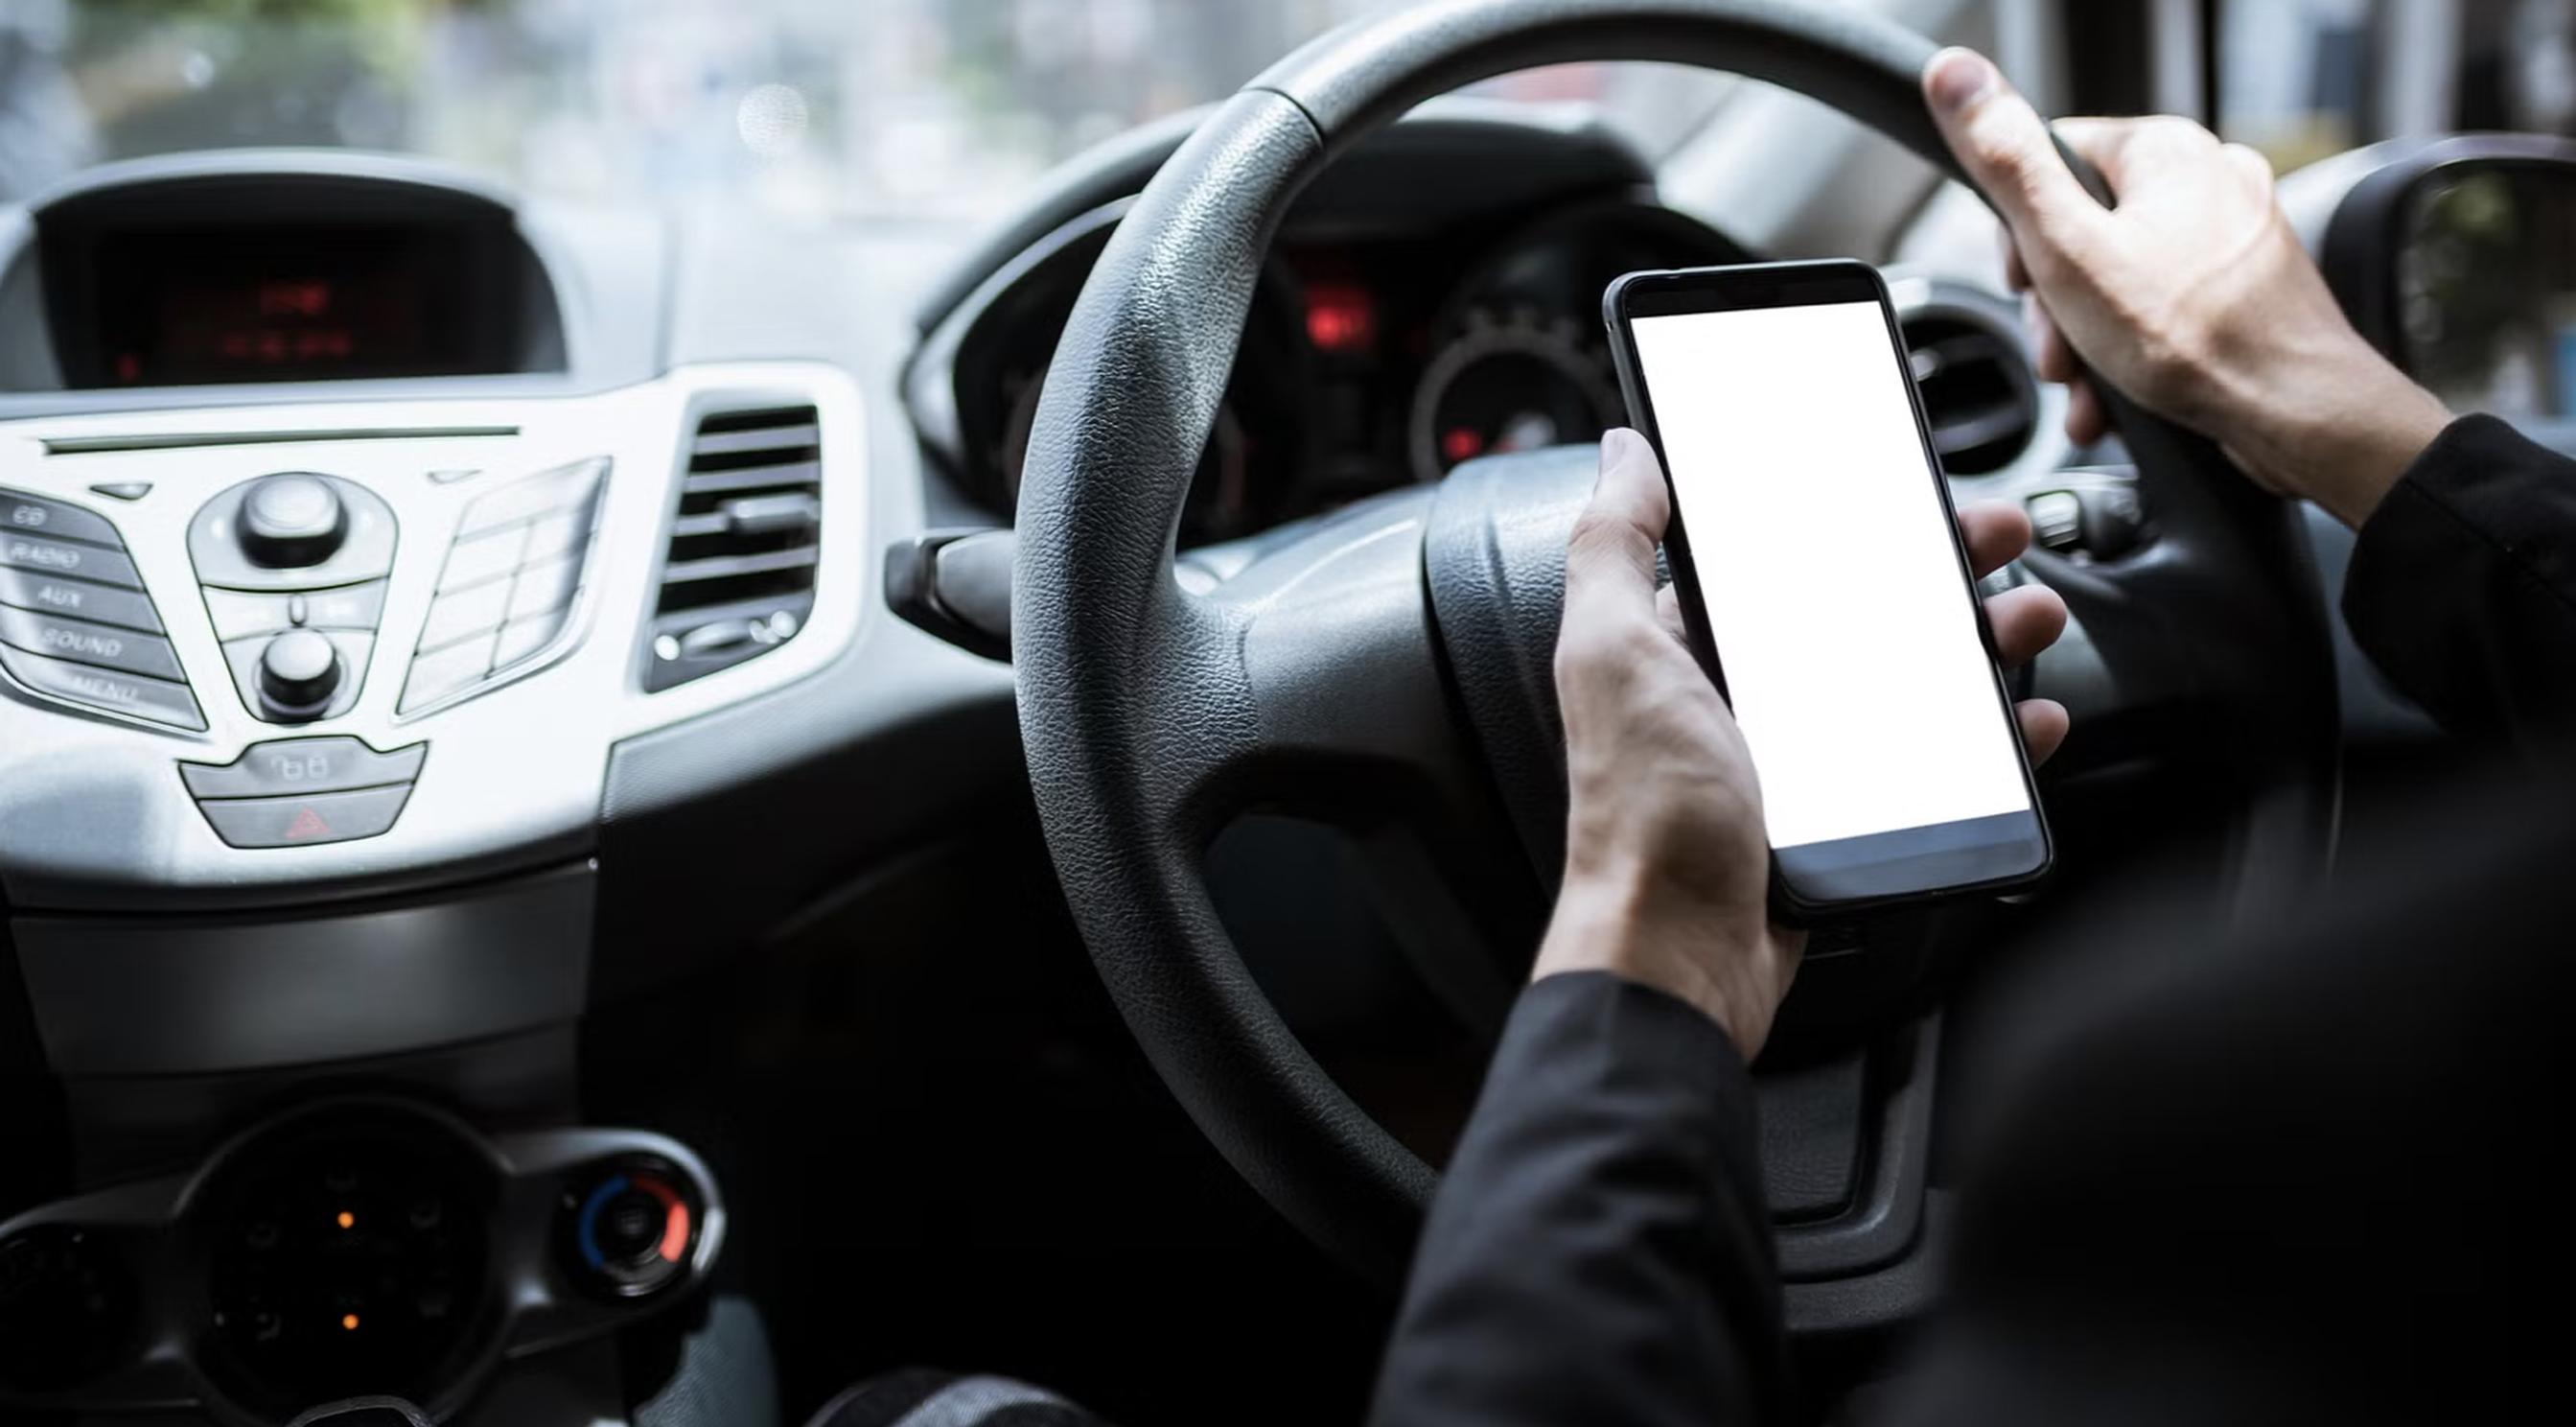 How to deter misuse of phones by drivers?